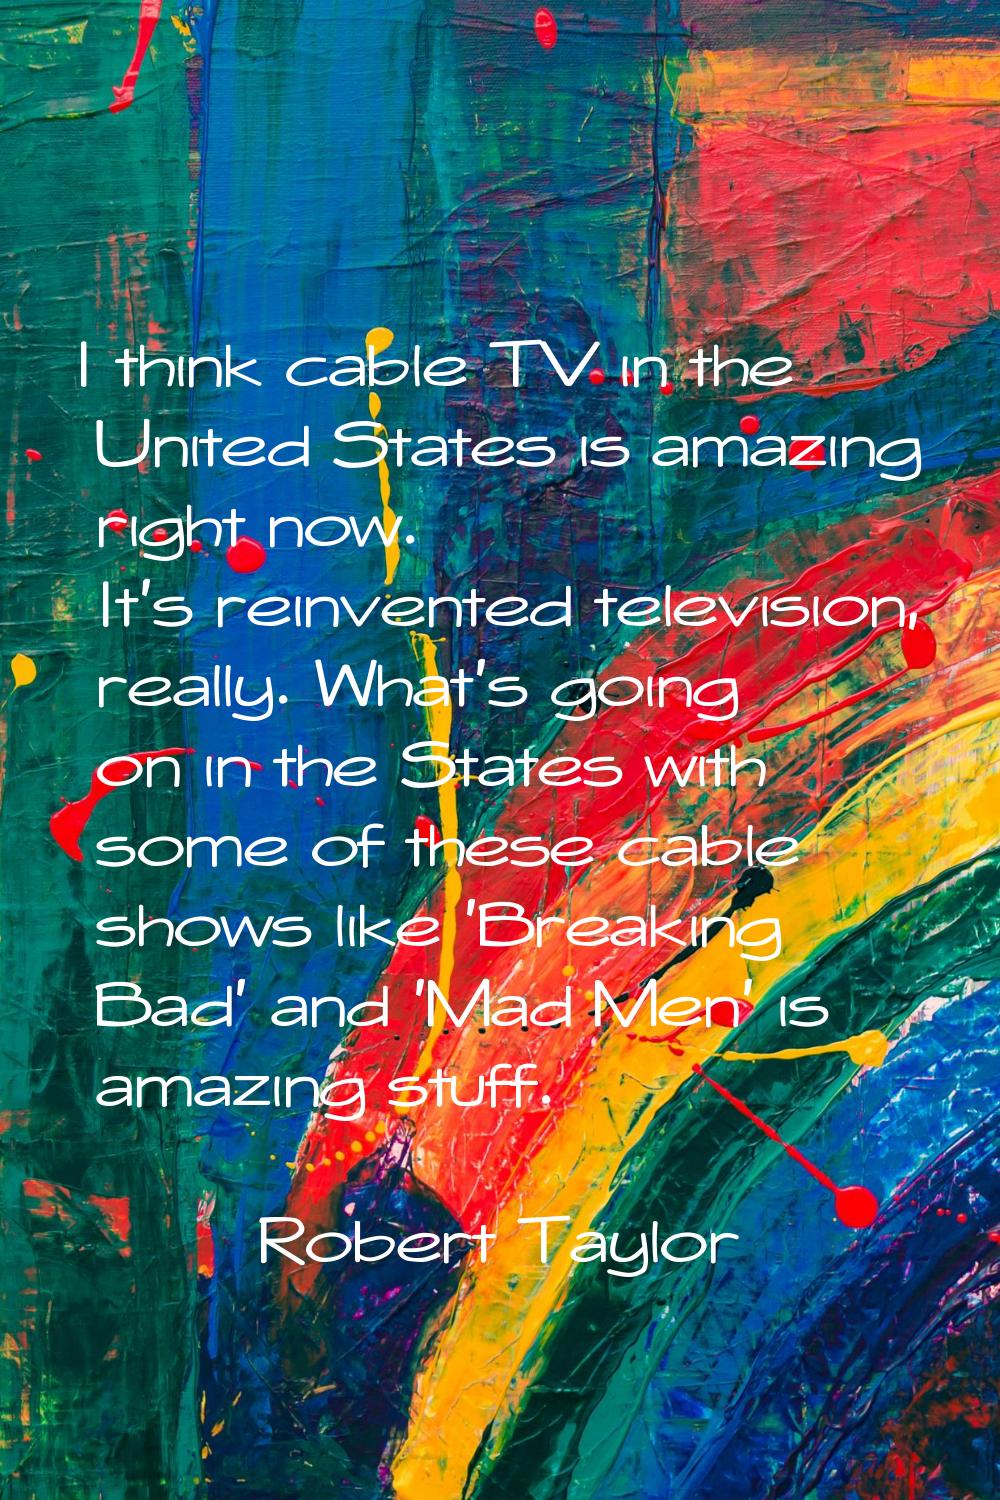 I think cable TV in the United States is amazing right now. It's reinvented television, really. Wha